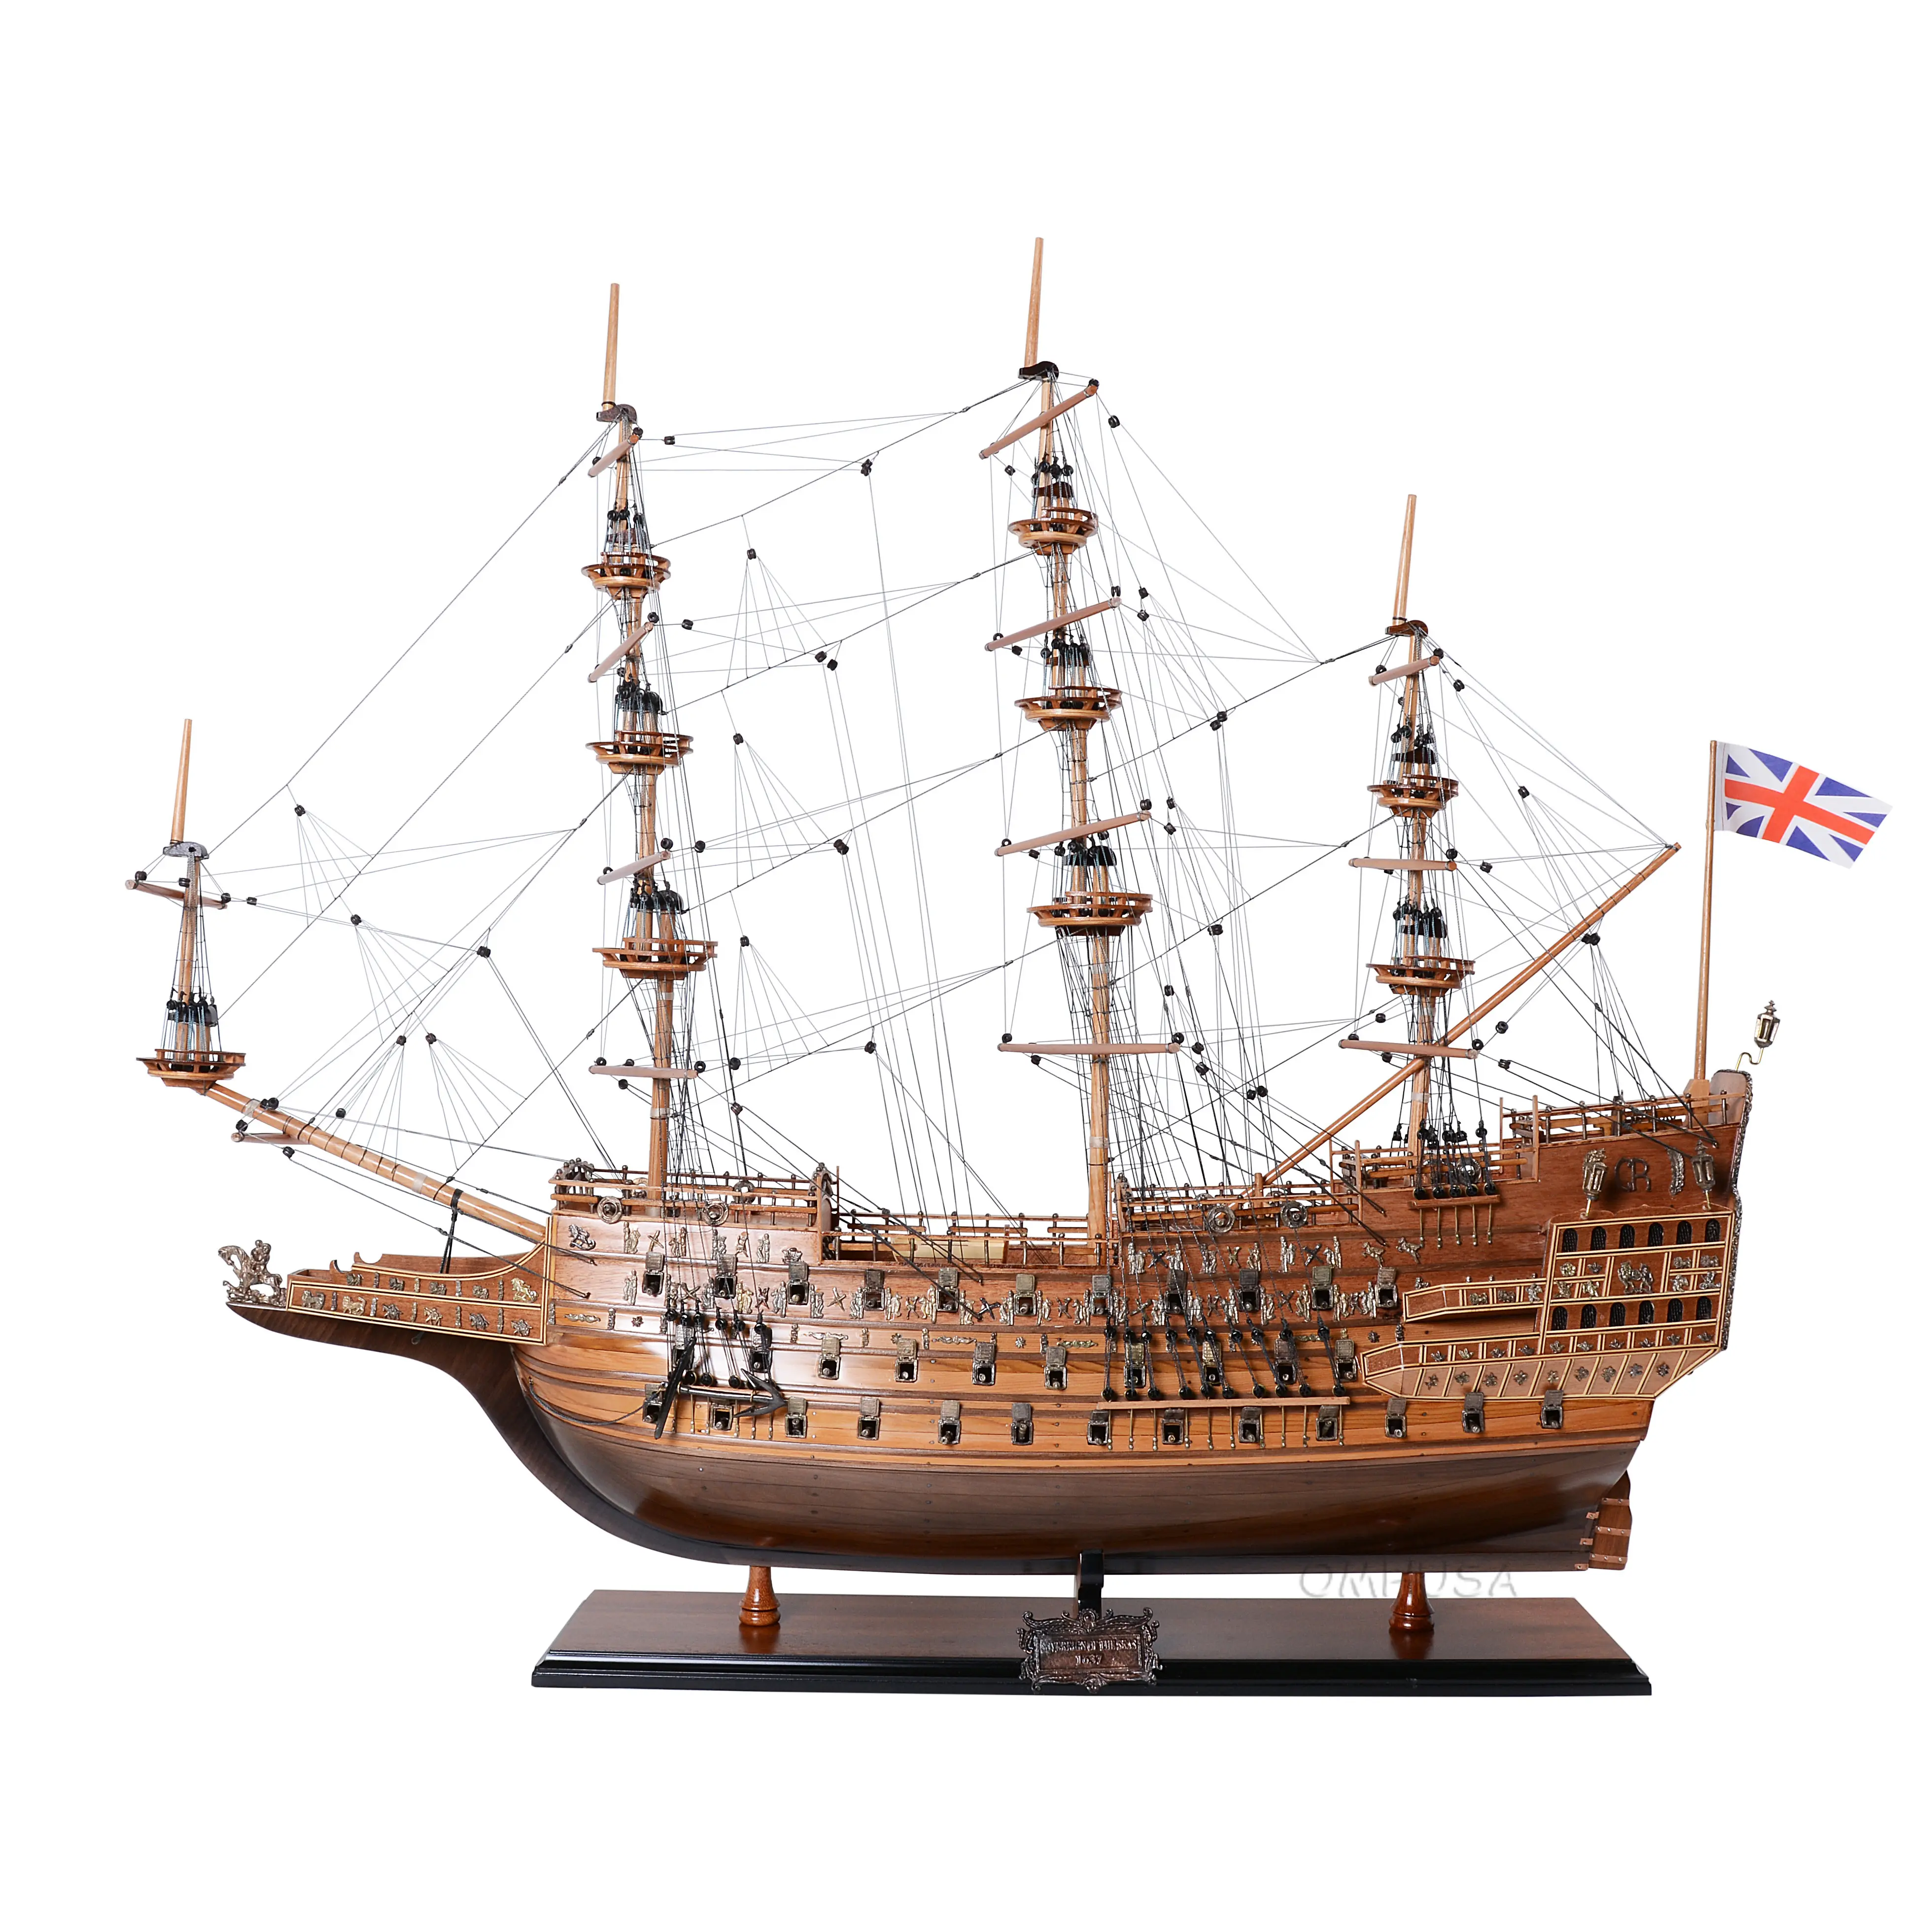 T077N Sovereign of the Seas No Sails T077N-SOVEREIGN-OF-THE-SEAS-NO-SAILS-L01.WEBP